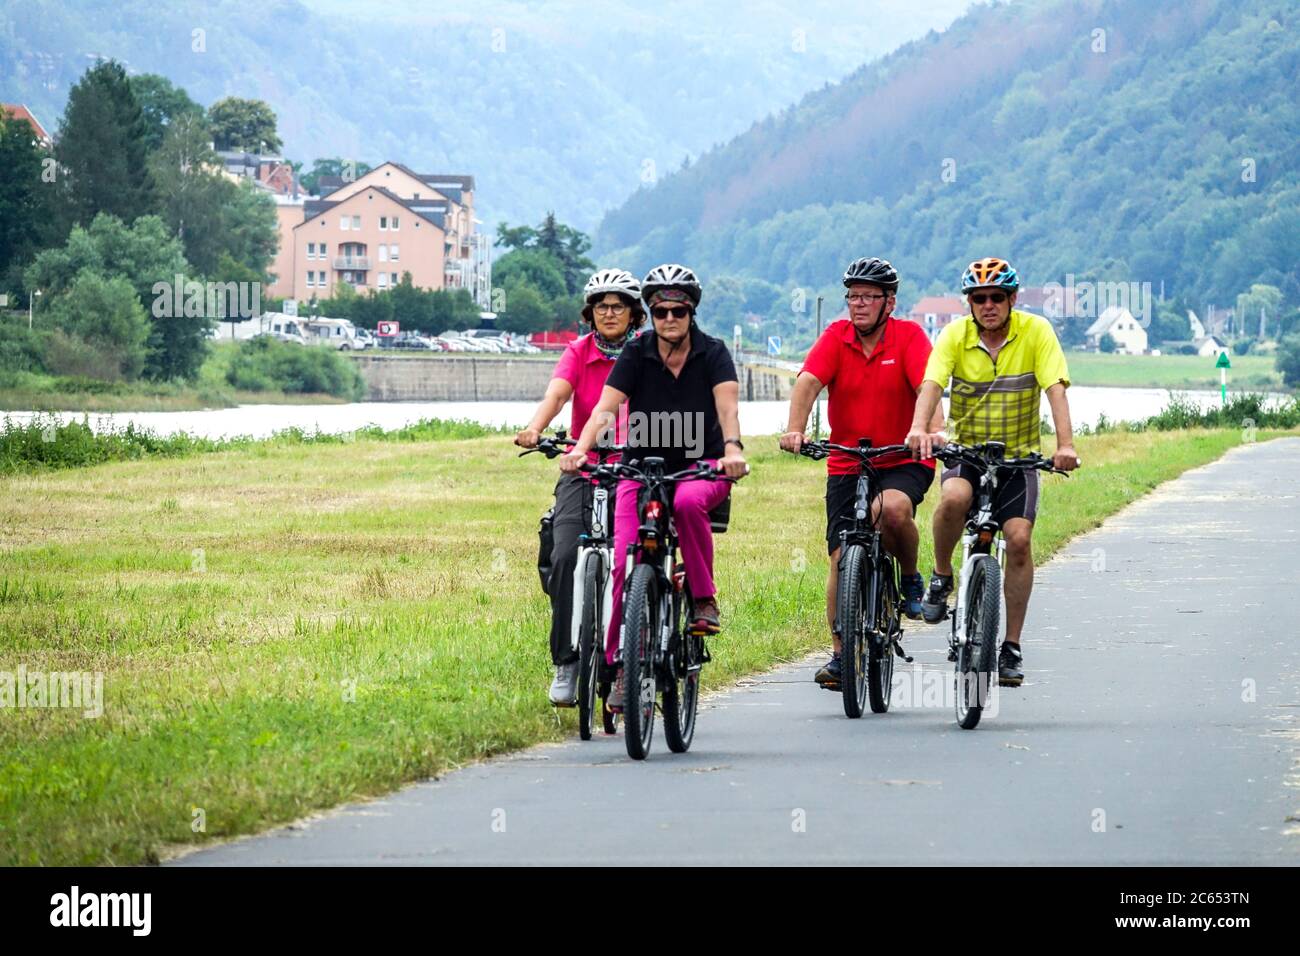 Seniors cycling on a bike path Germany People biking along the Elbe river, vacation Stock Photo